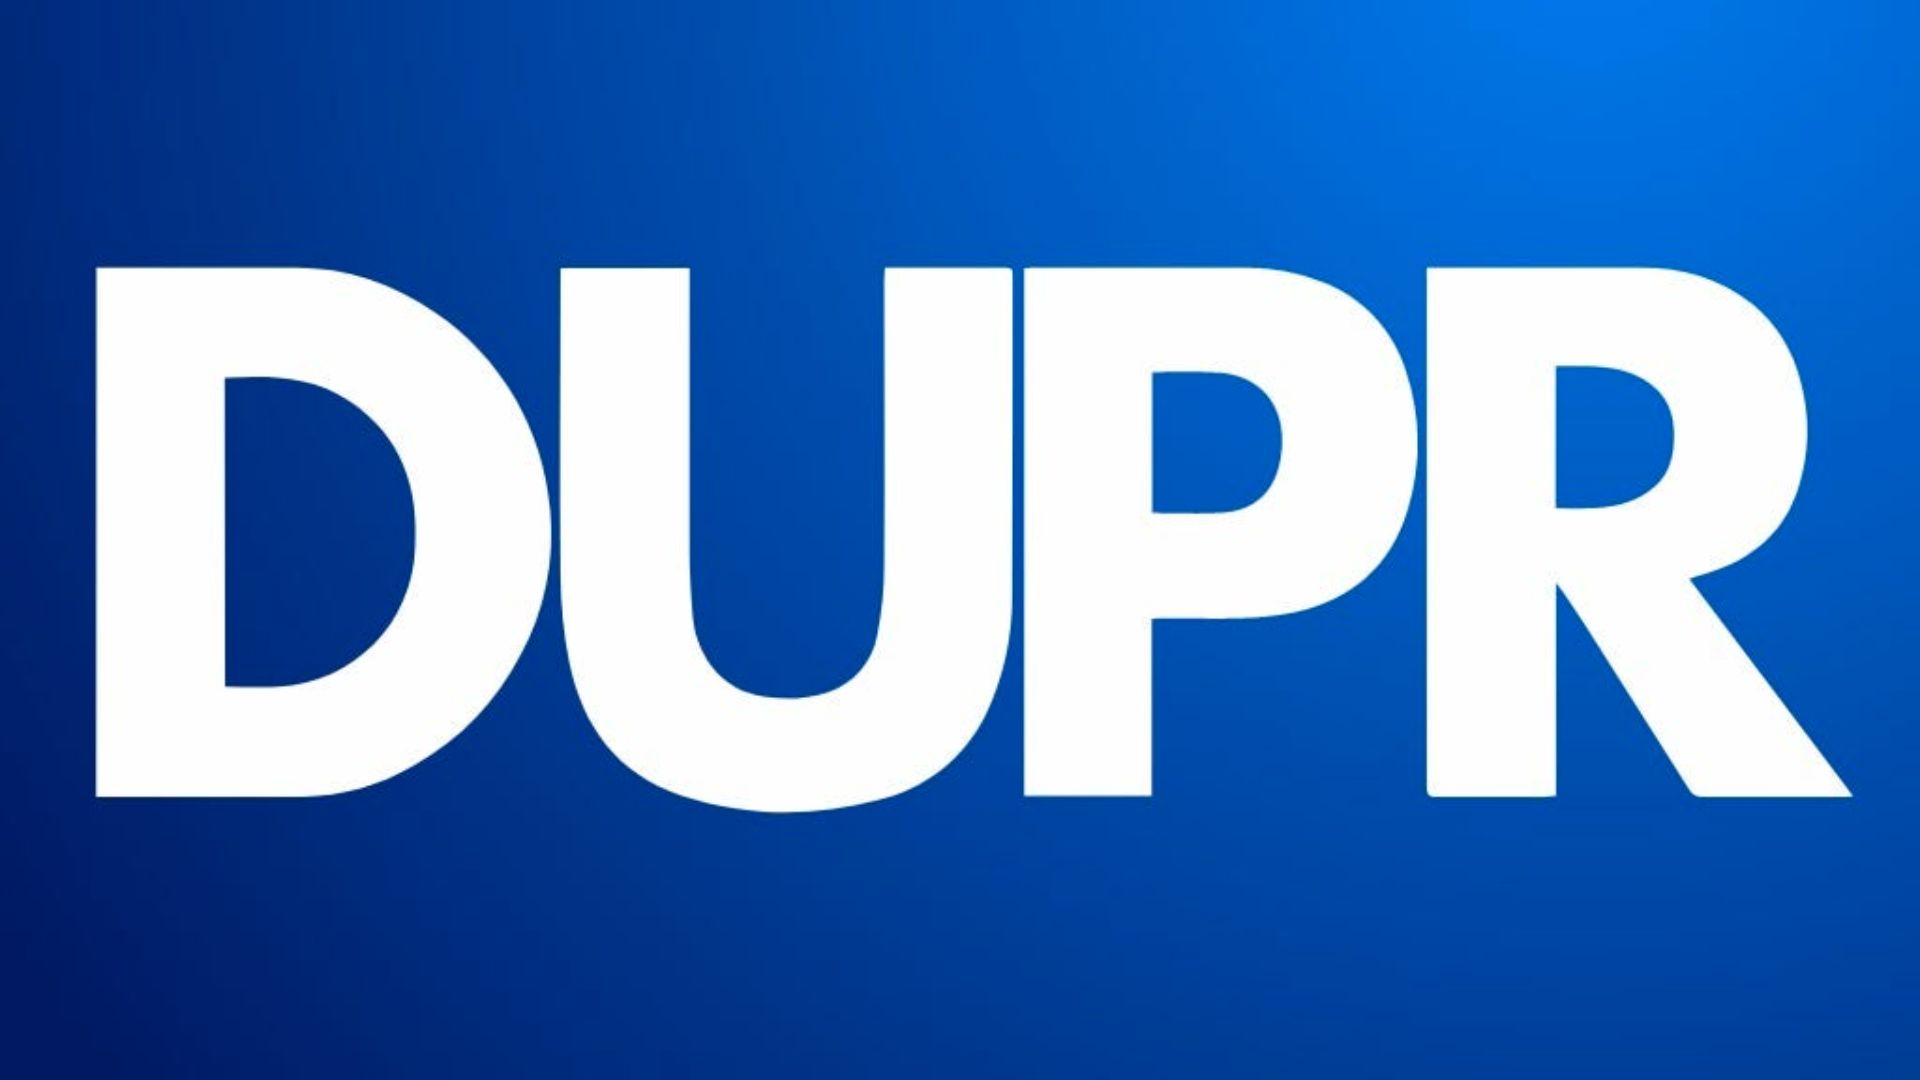 Andre Agassi, David Kass, and Raine Ventures Secure Majority Stake in DUPR with $8 Million Investment